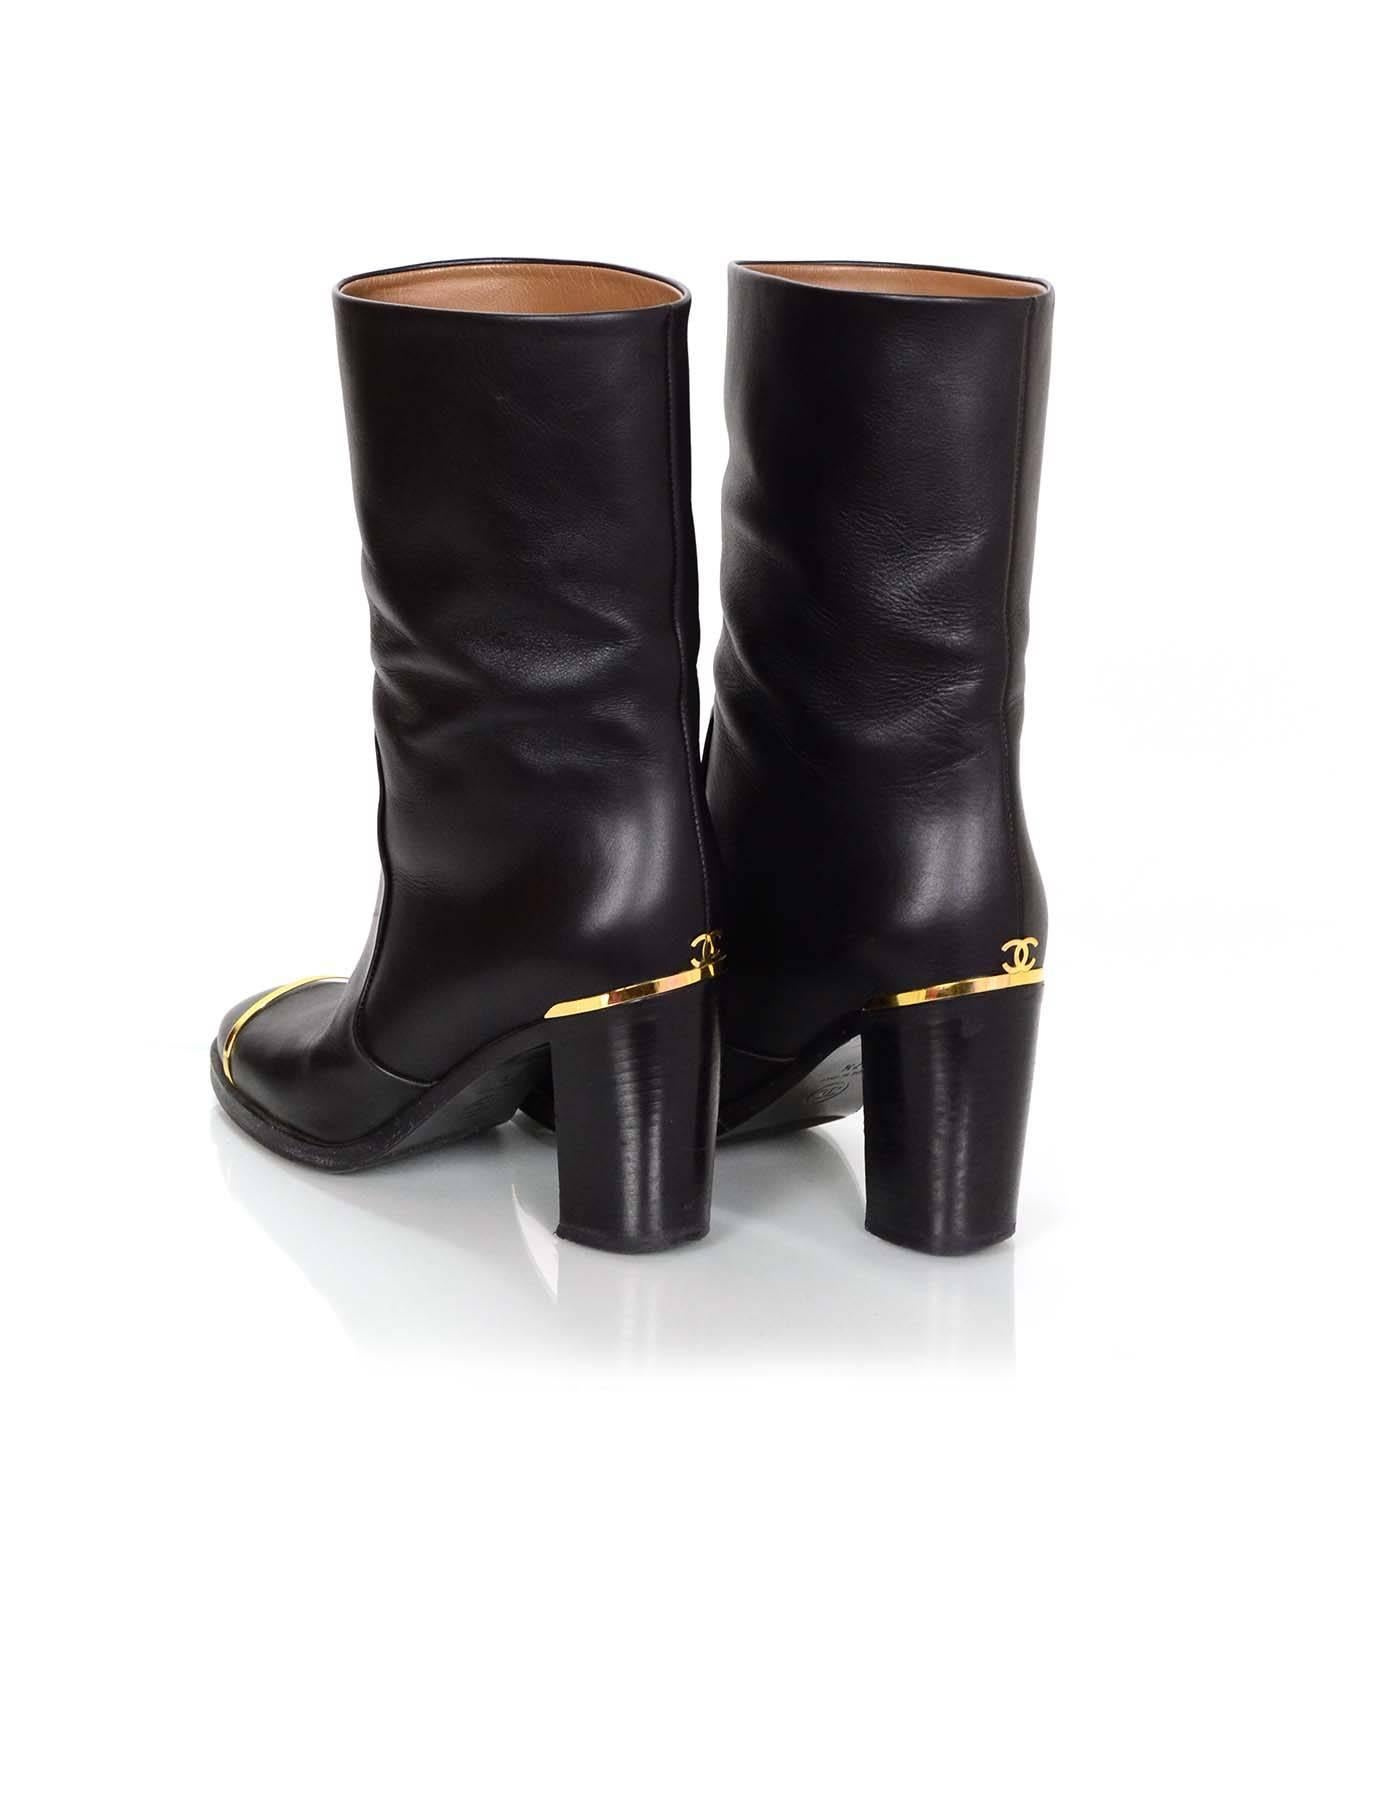 Chanel Black Leather Boots Sz 37.5 1